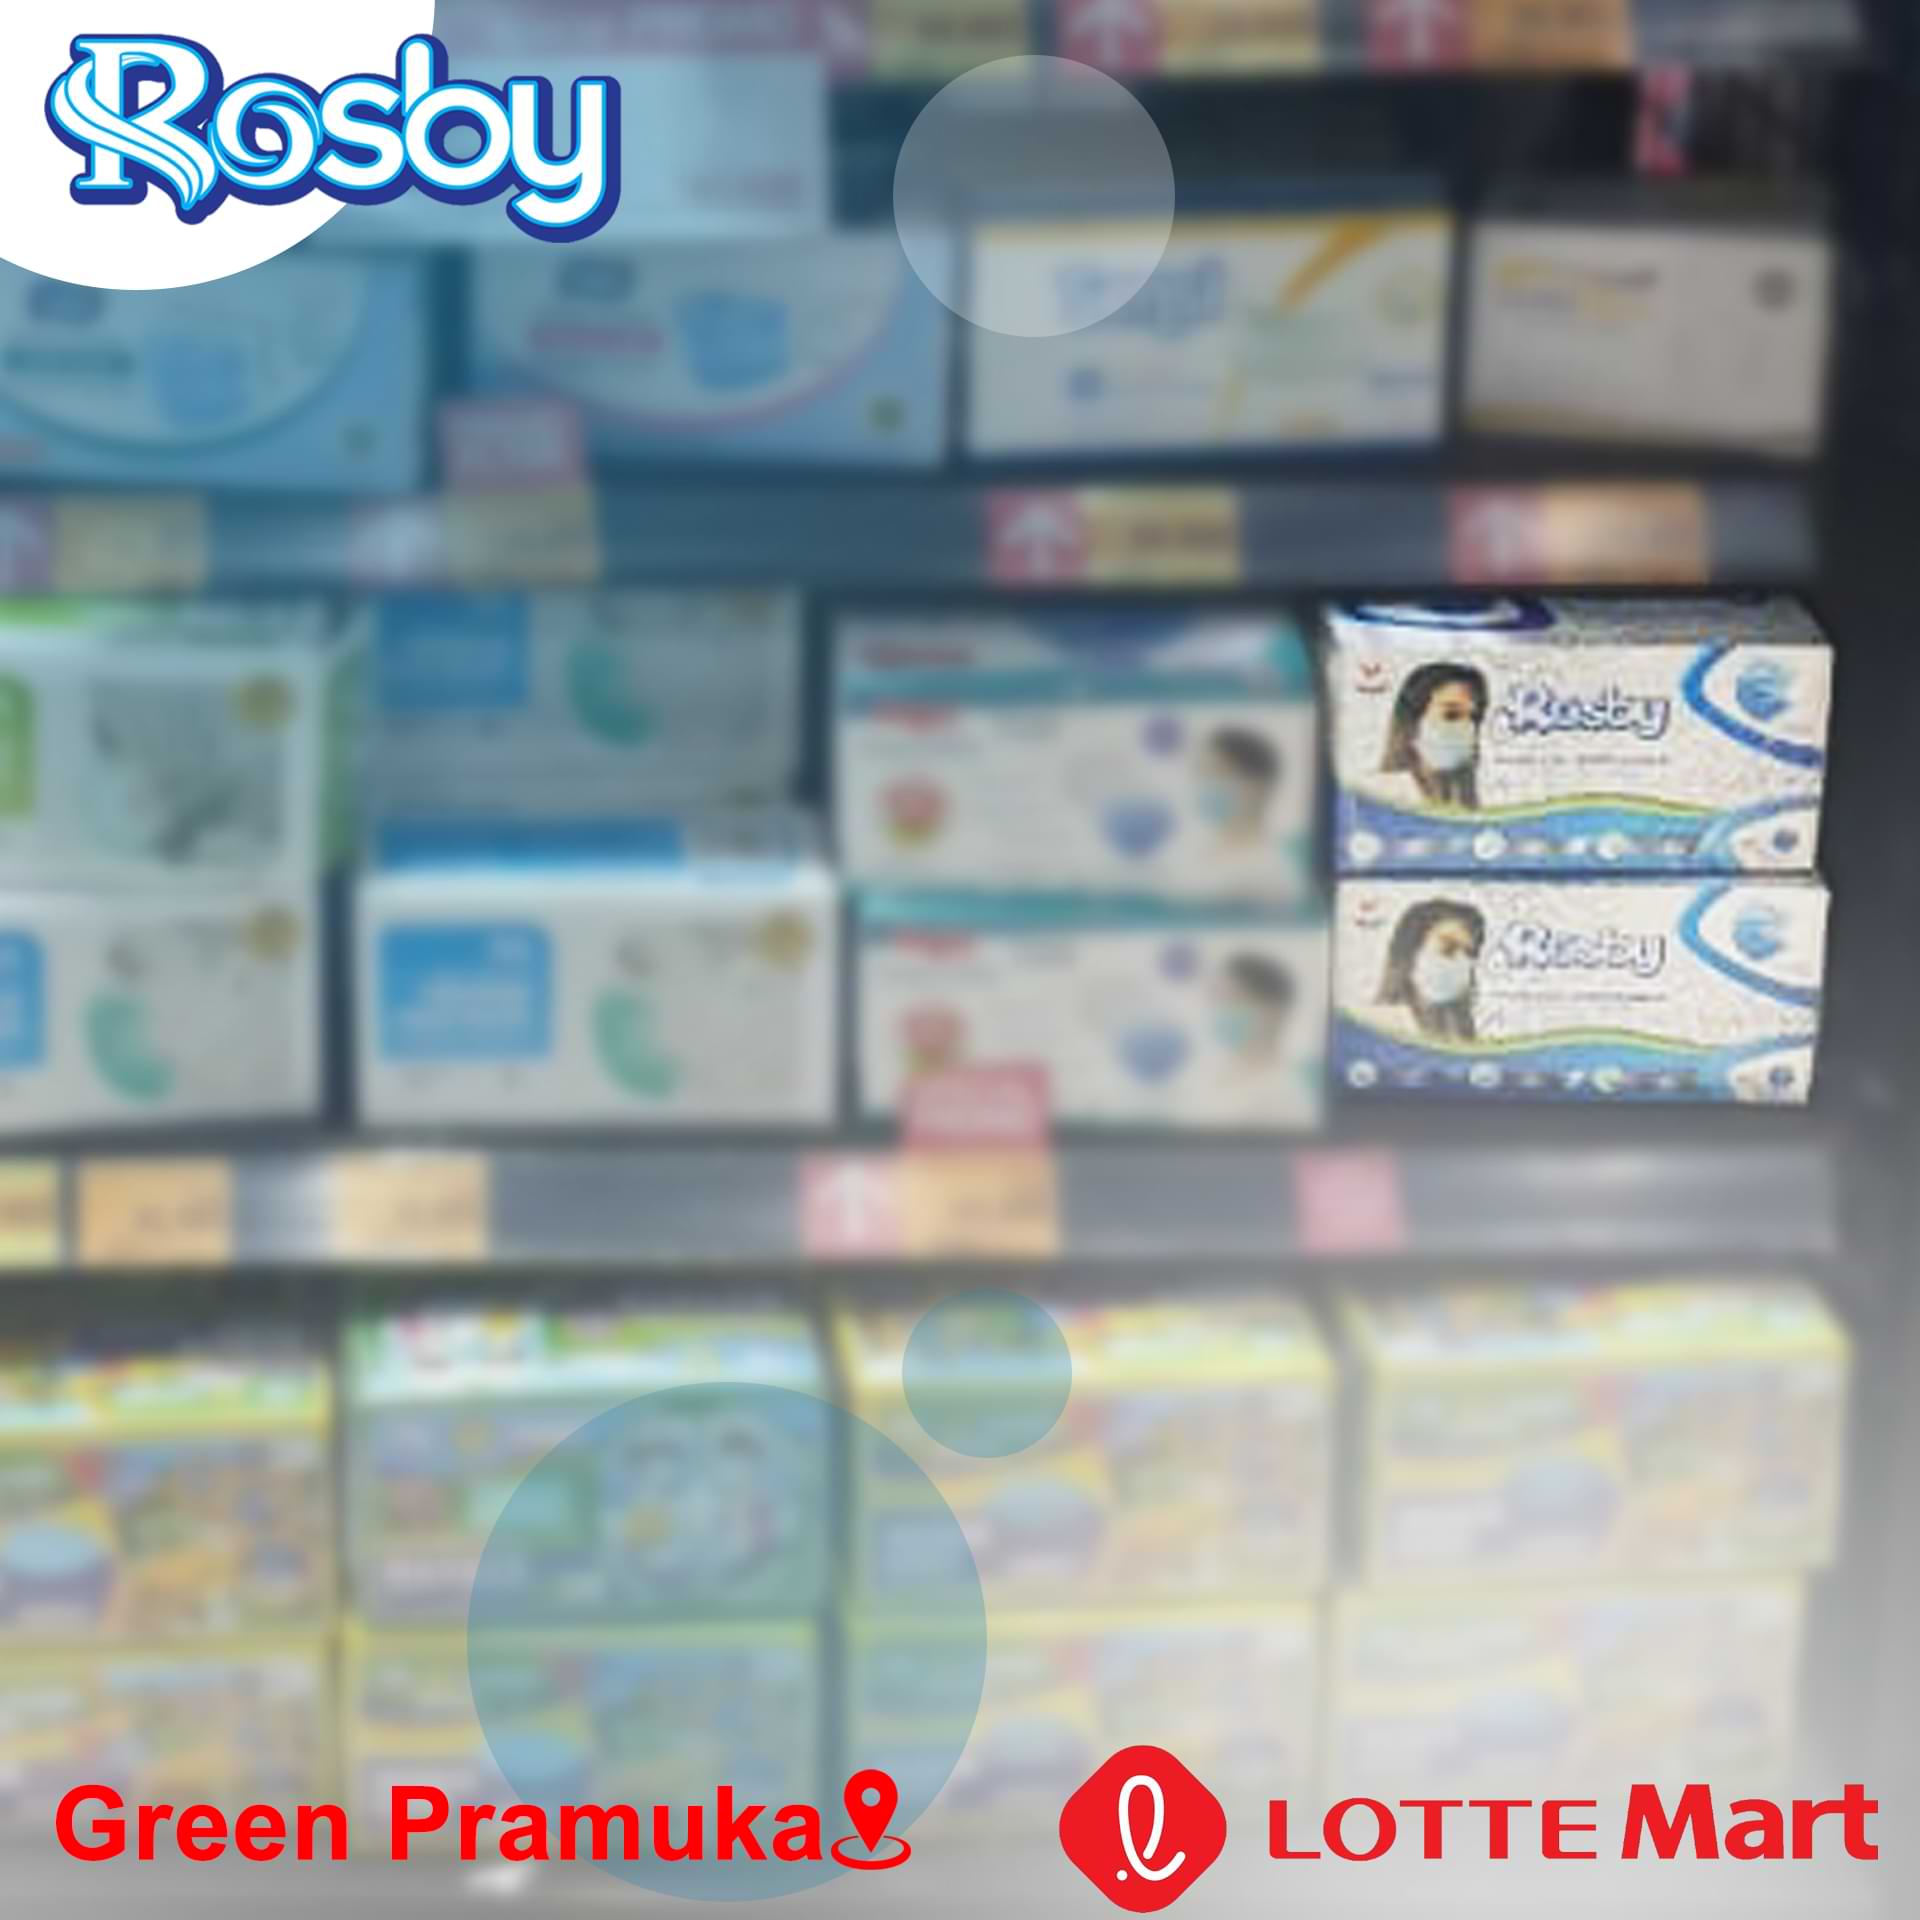 Rosby Indonesia